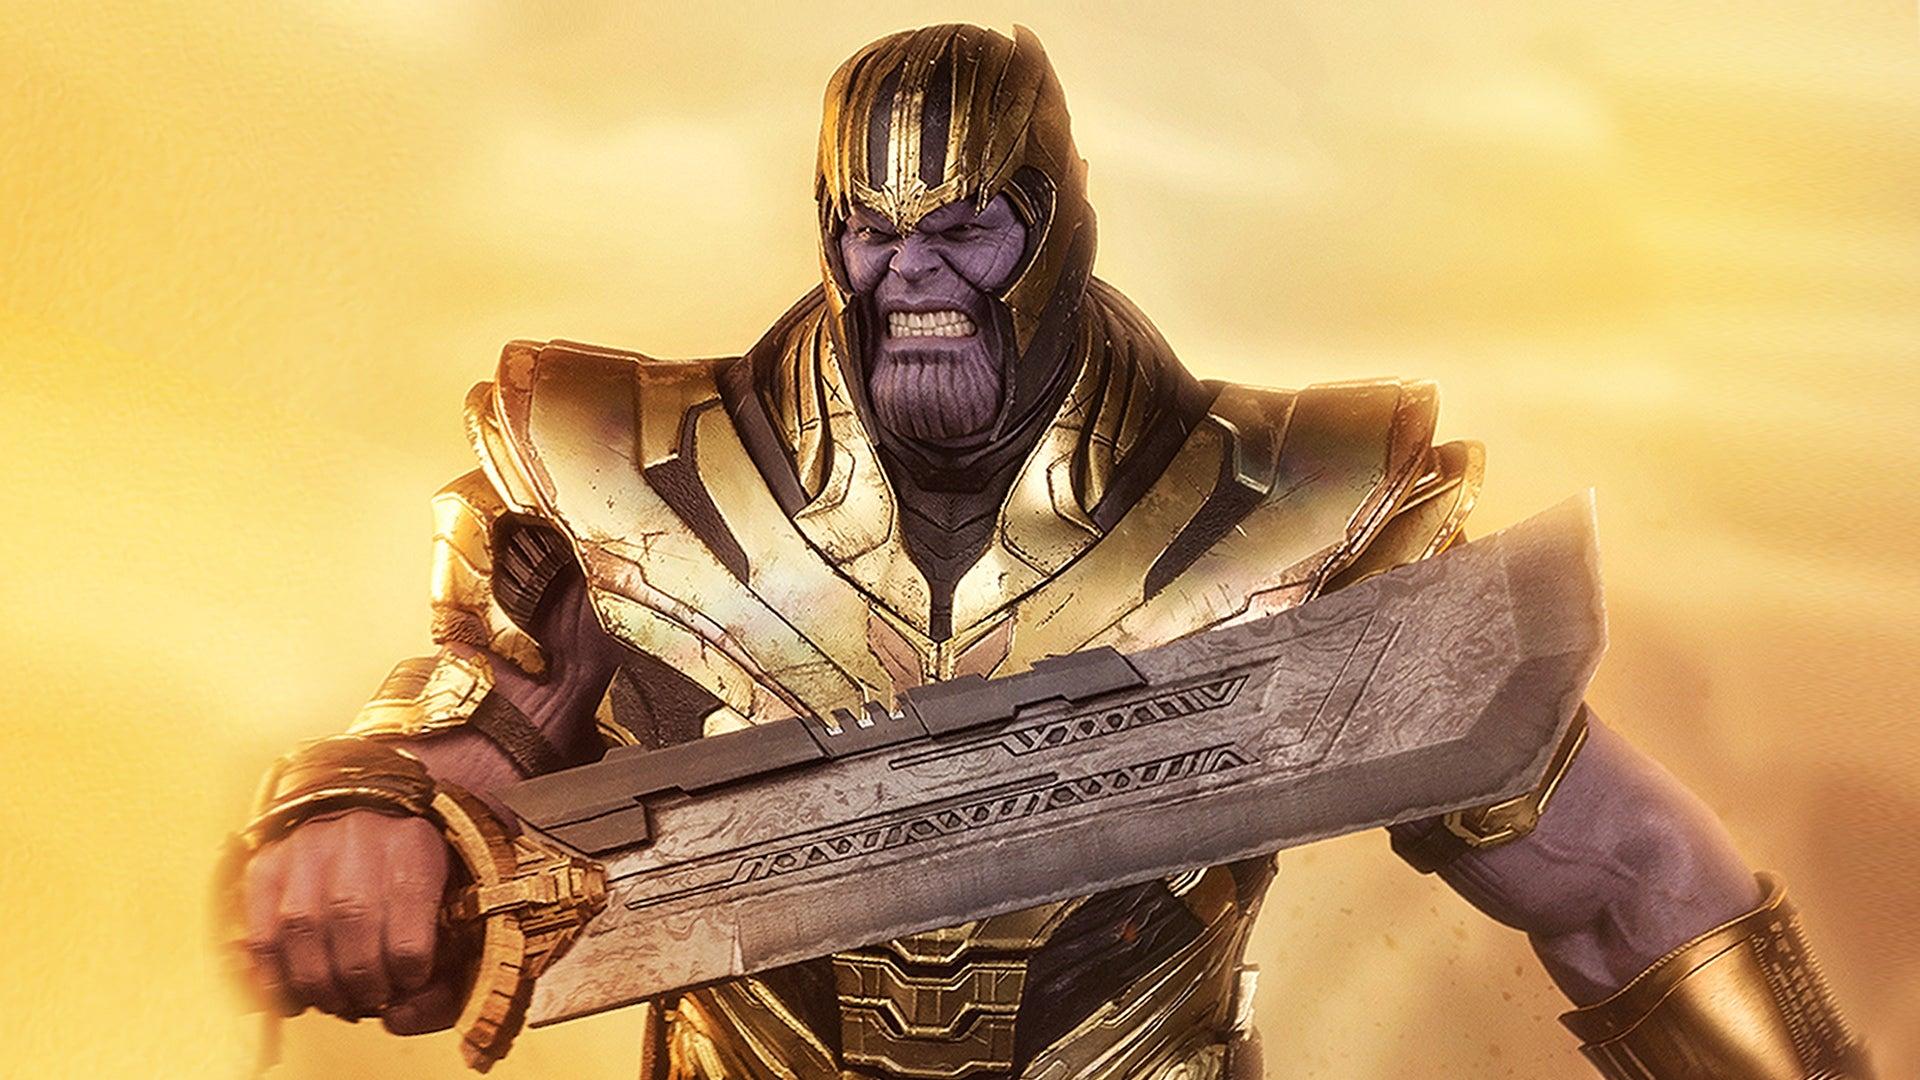 Avengers: Endgame Does Thanos Have a New Weapon and Armor